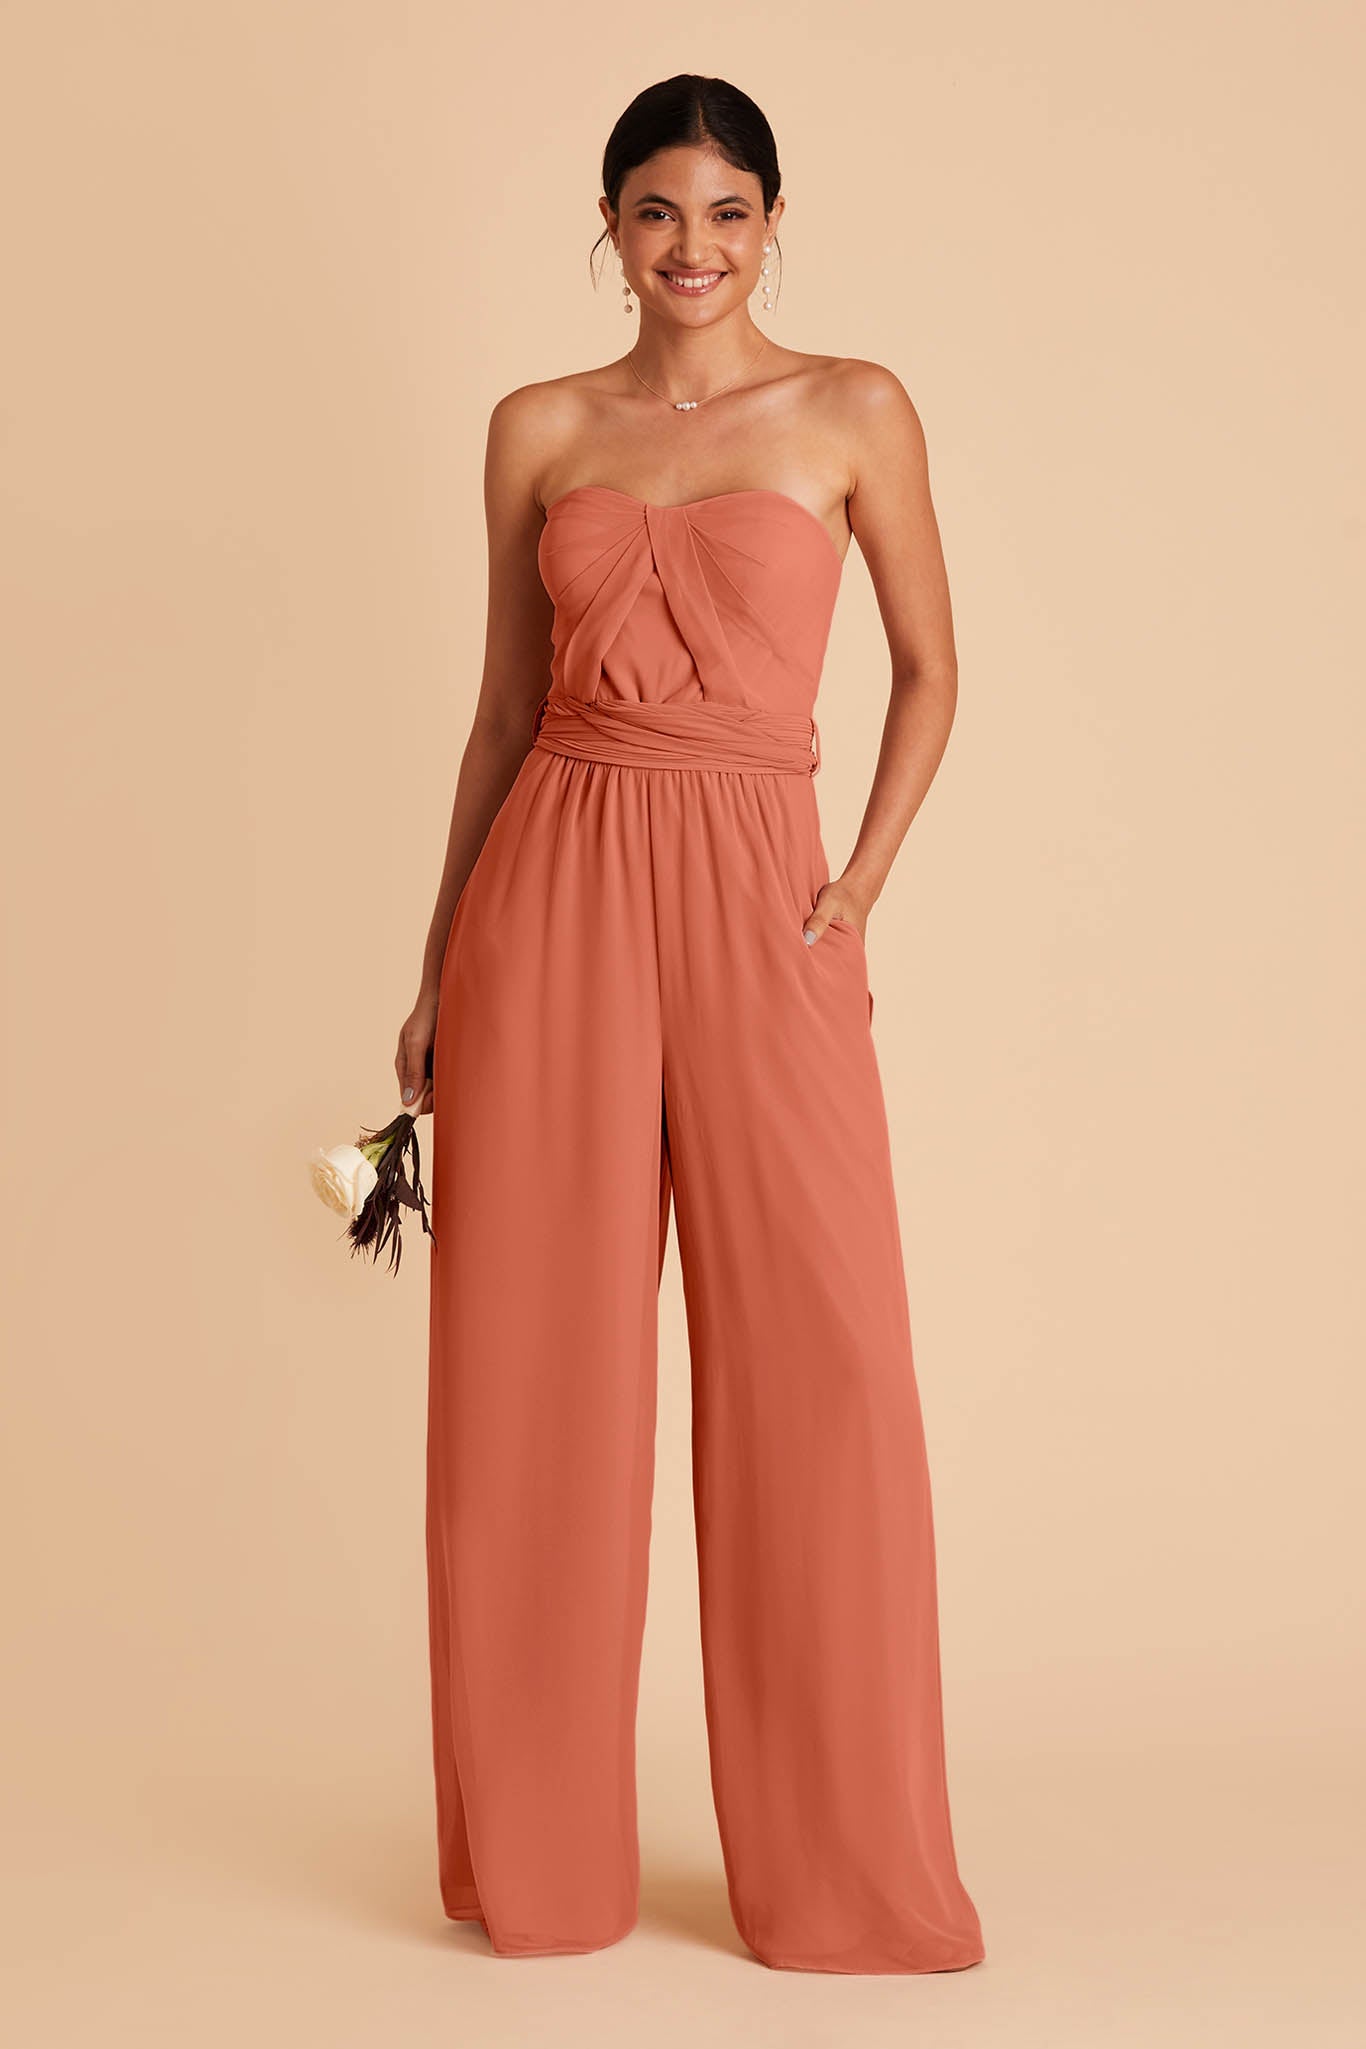 Light orange wedding jumpsuit with sweetheart bodice with convertible neckline